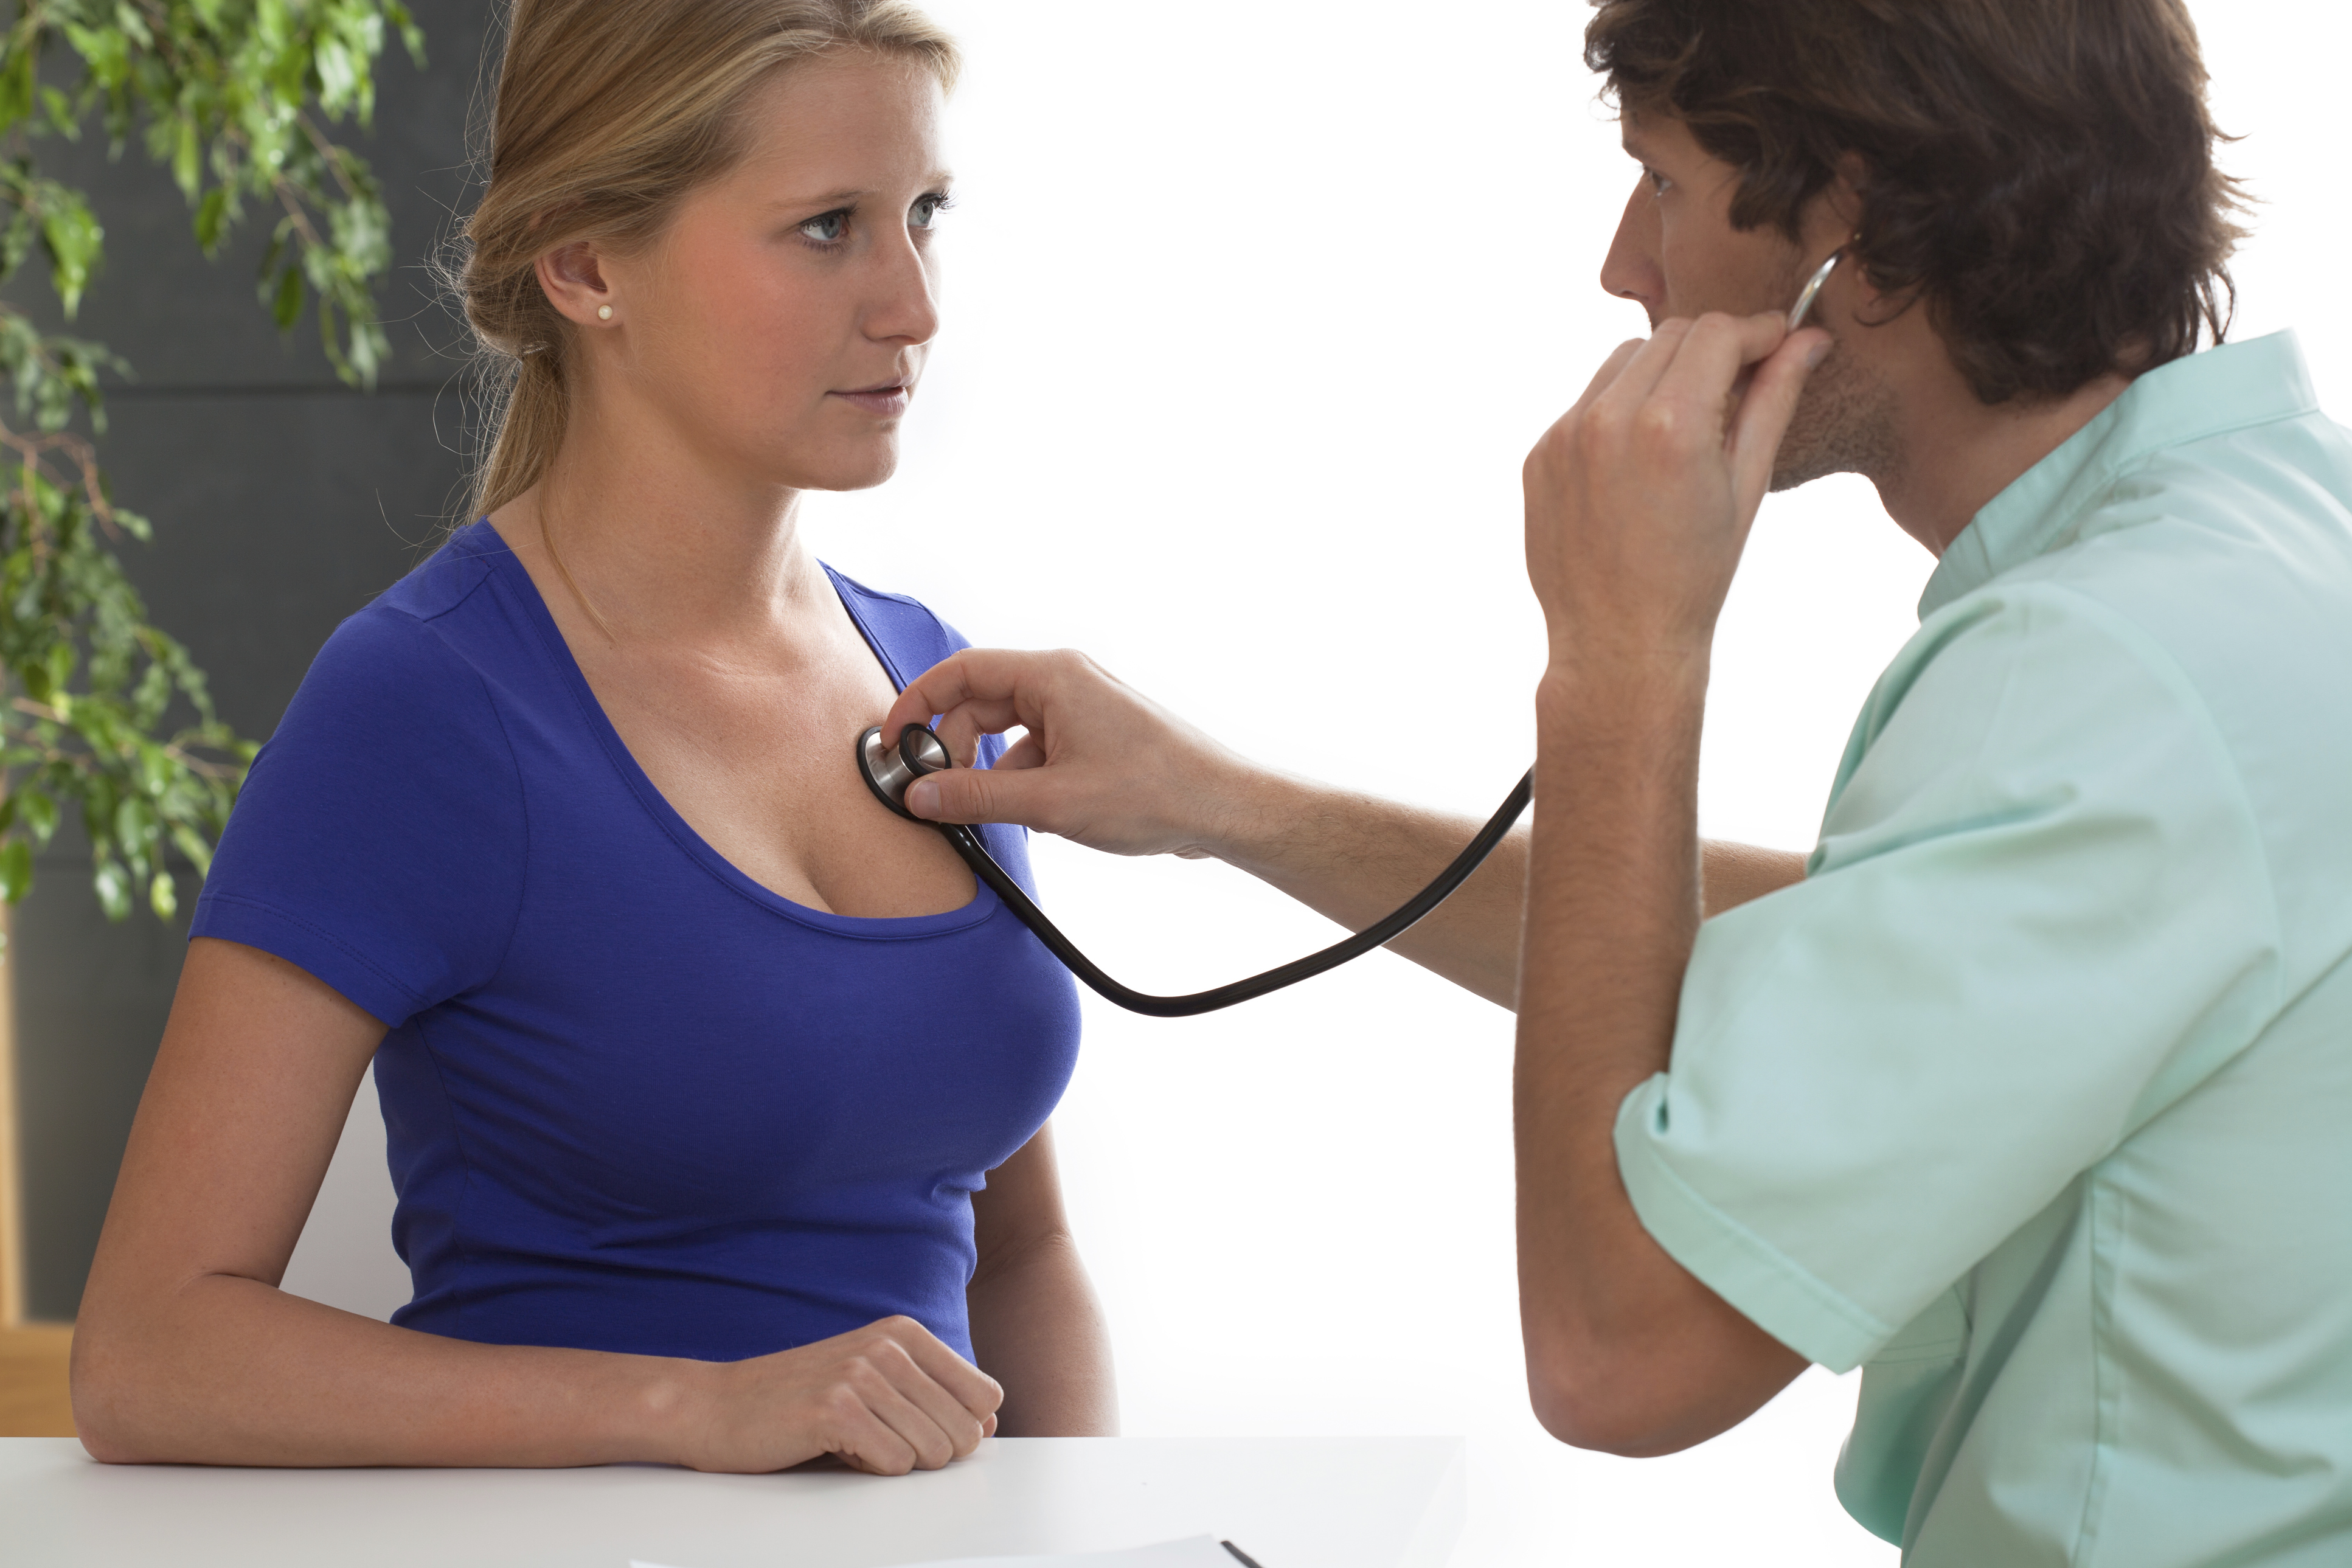 Women, especially younger ones, need a wake-up call about heart health